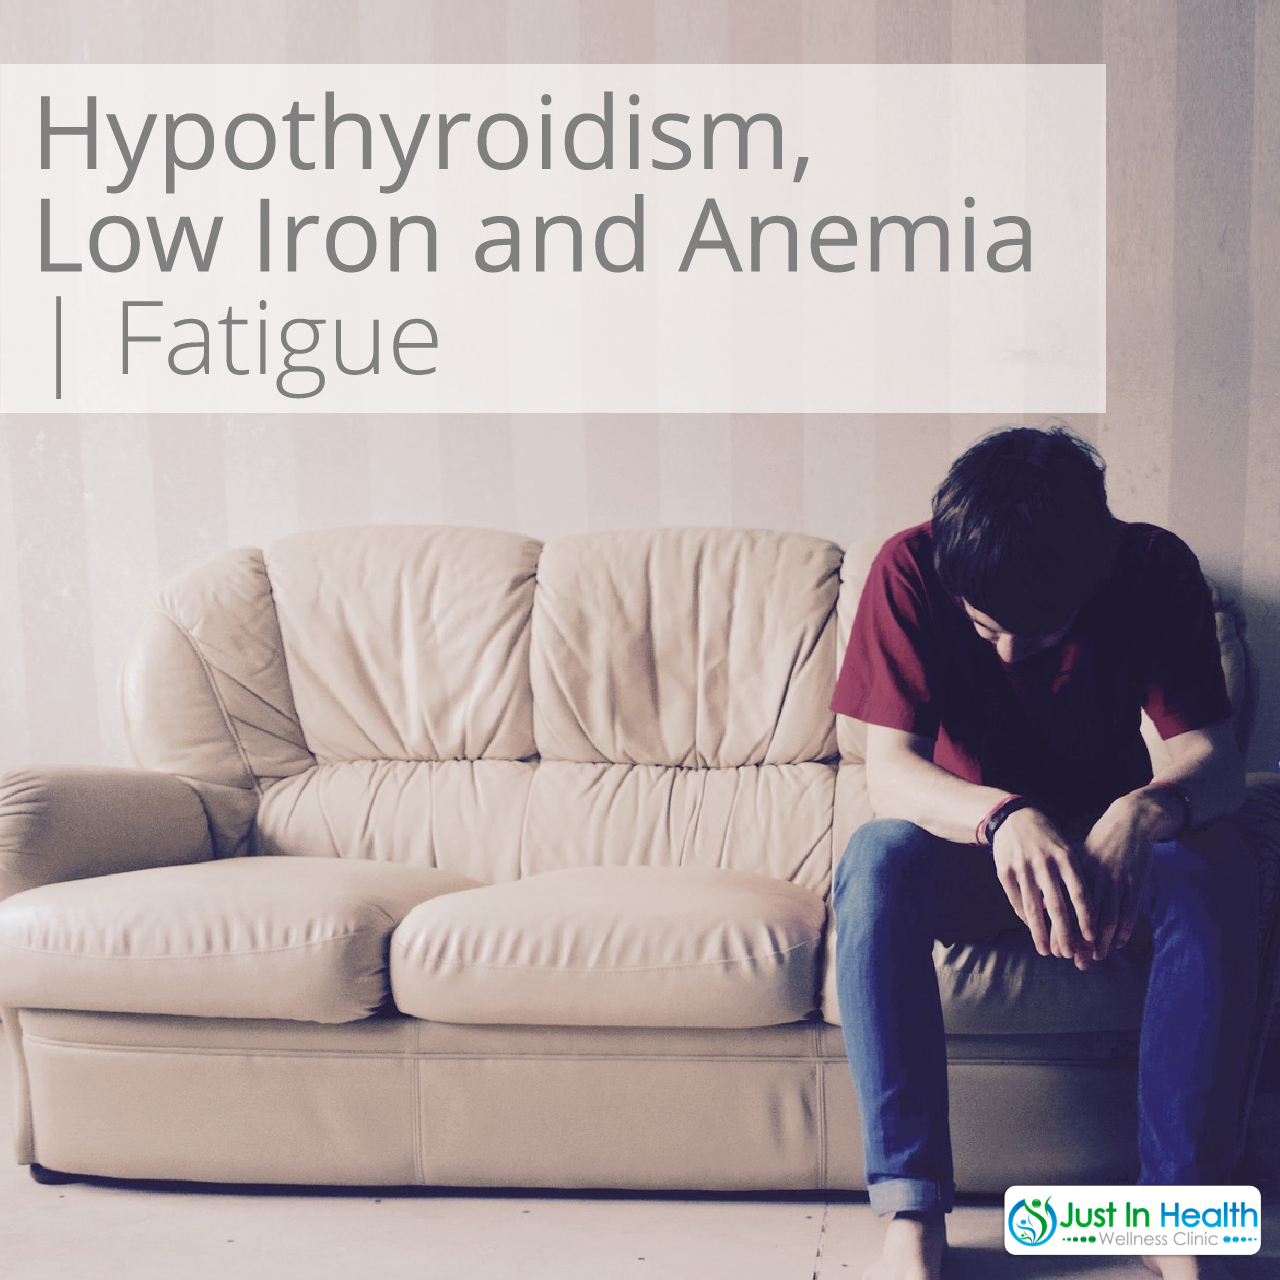 Hypothyroidism and anemia